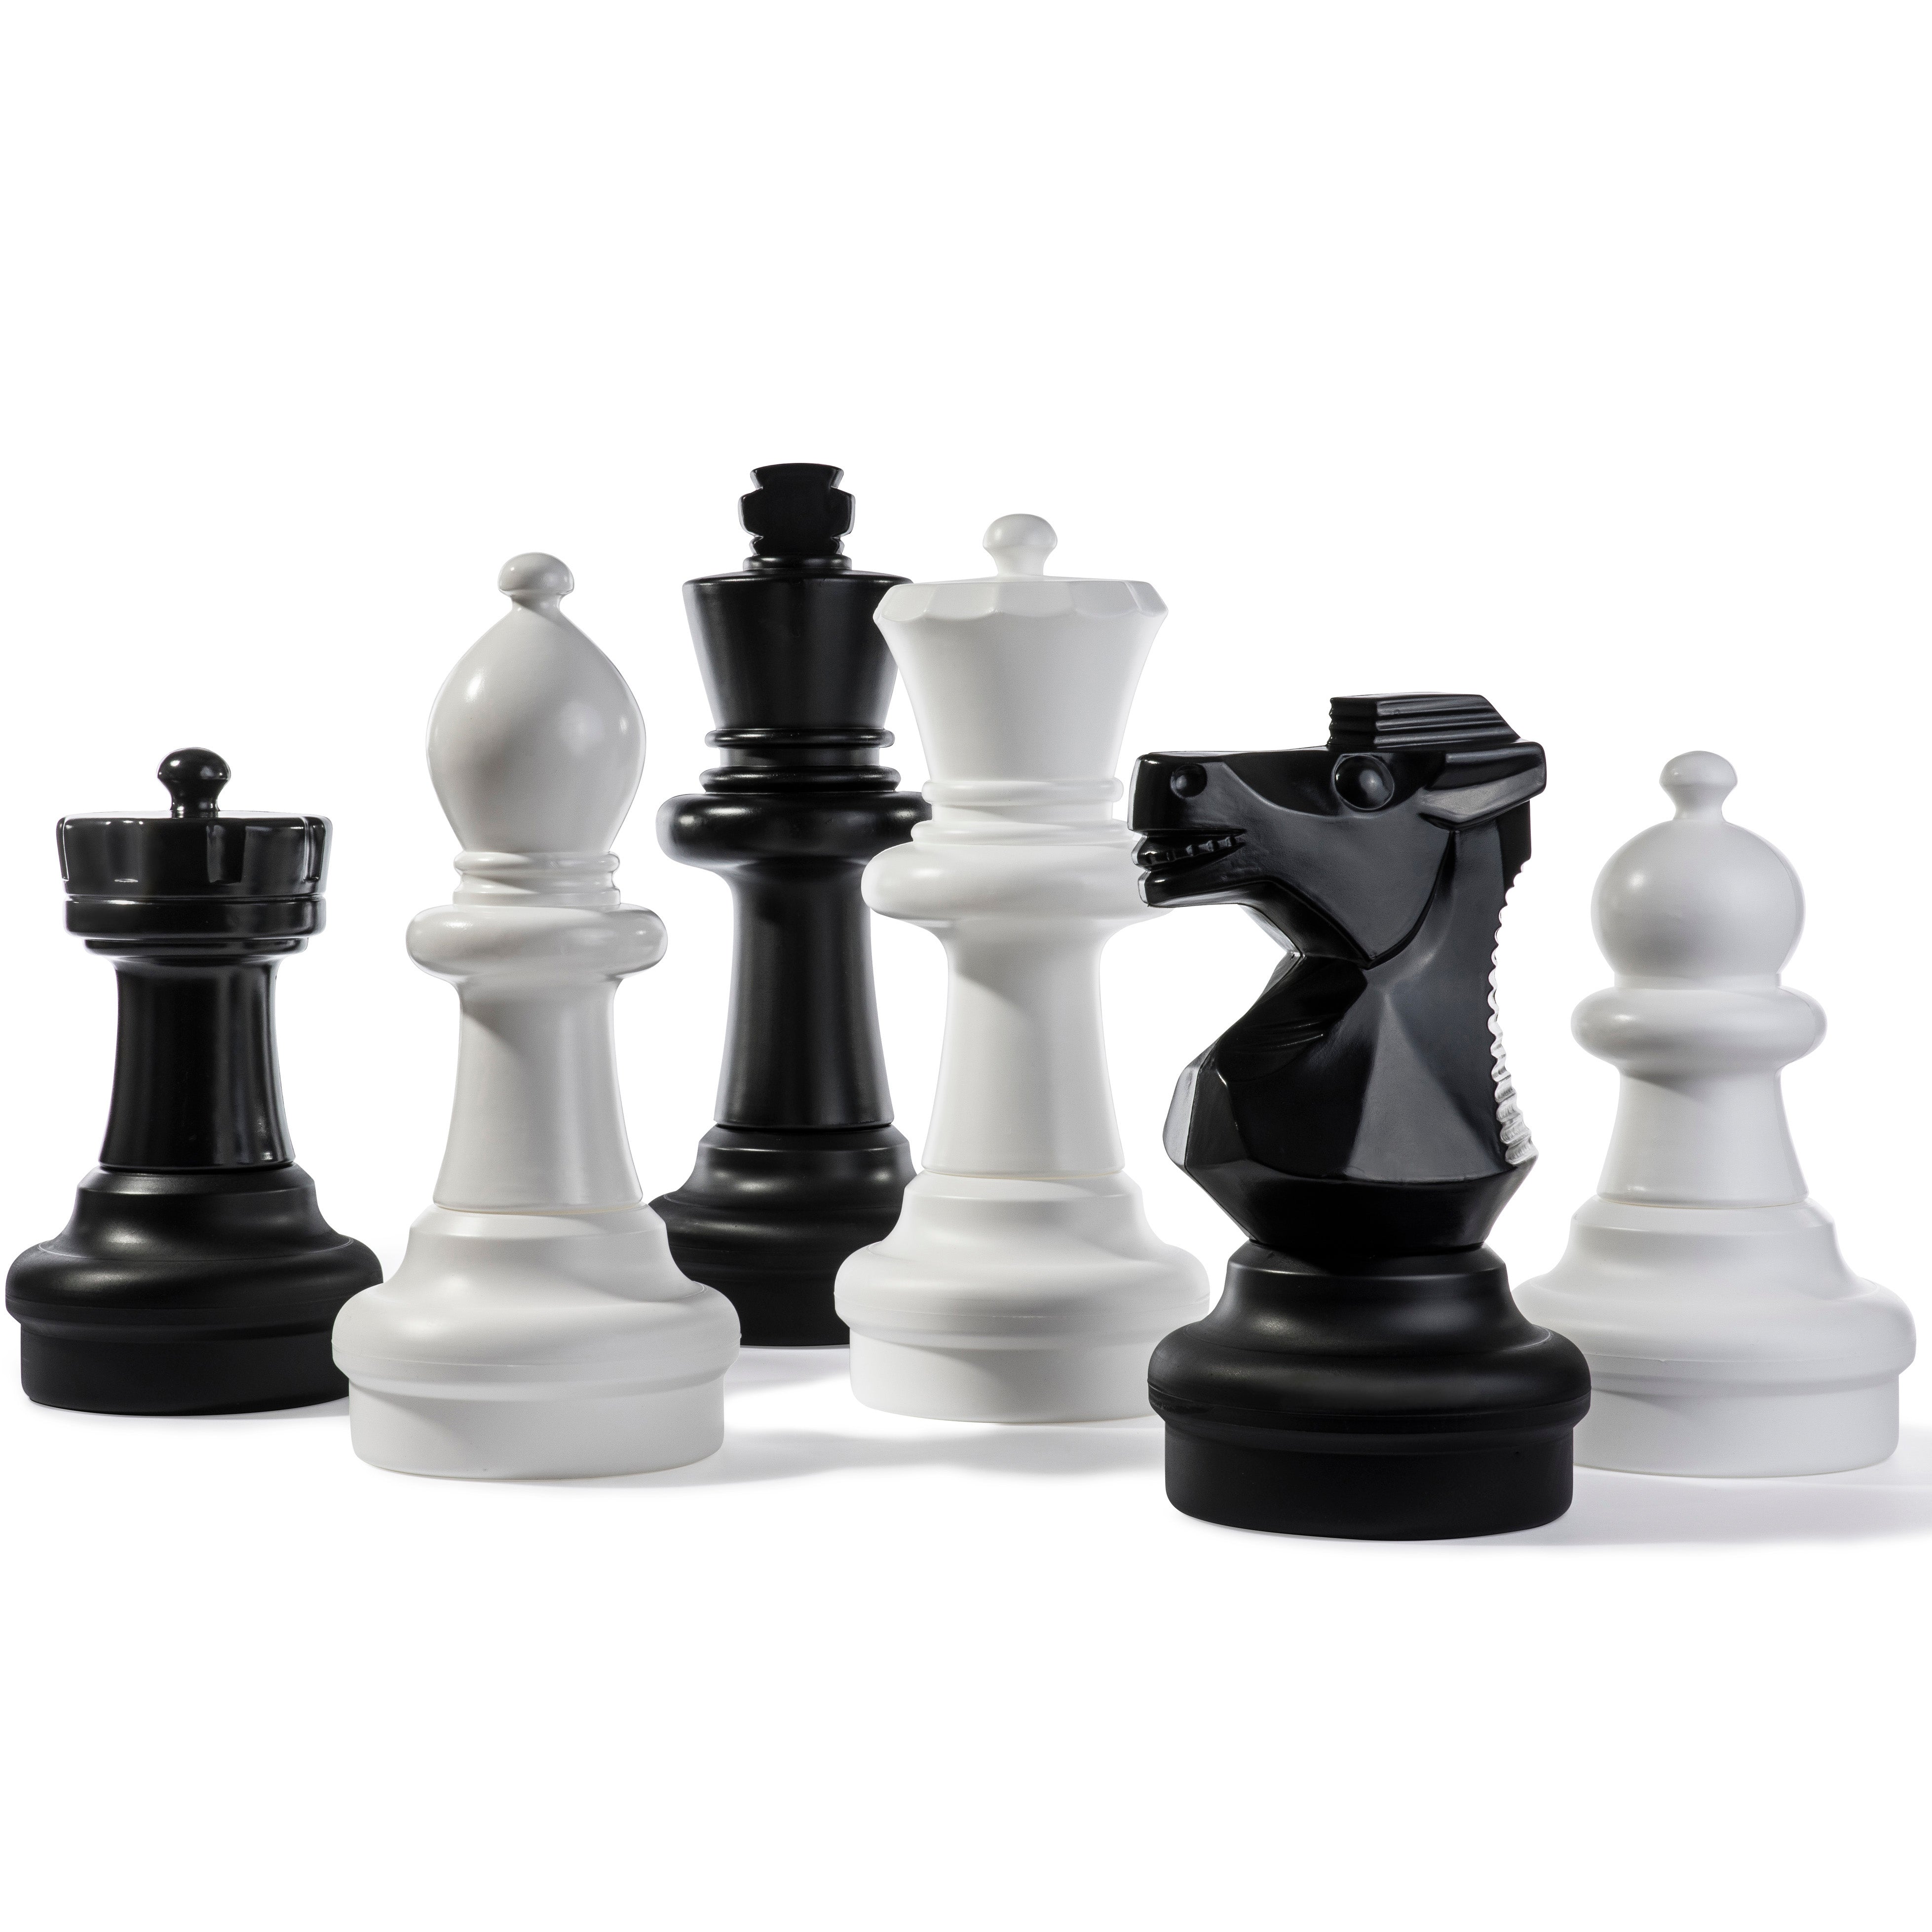 Giant solitaire : Chess Shop Online